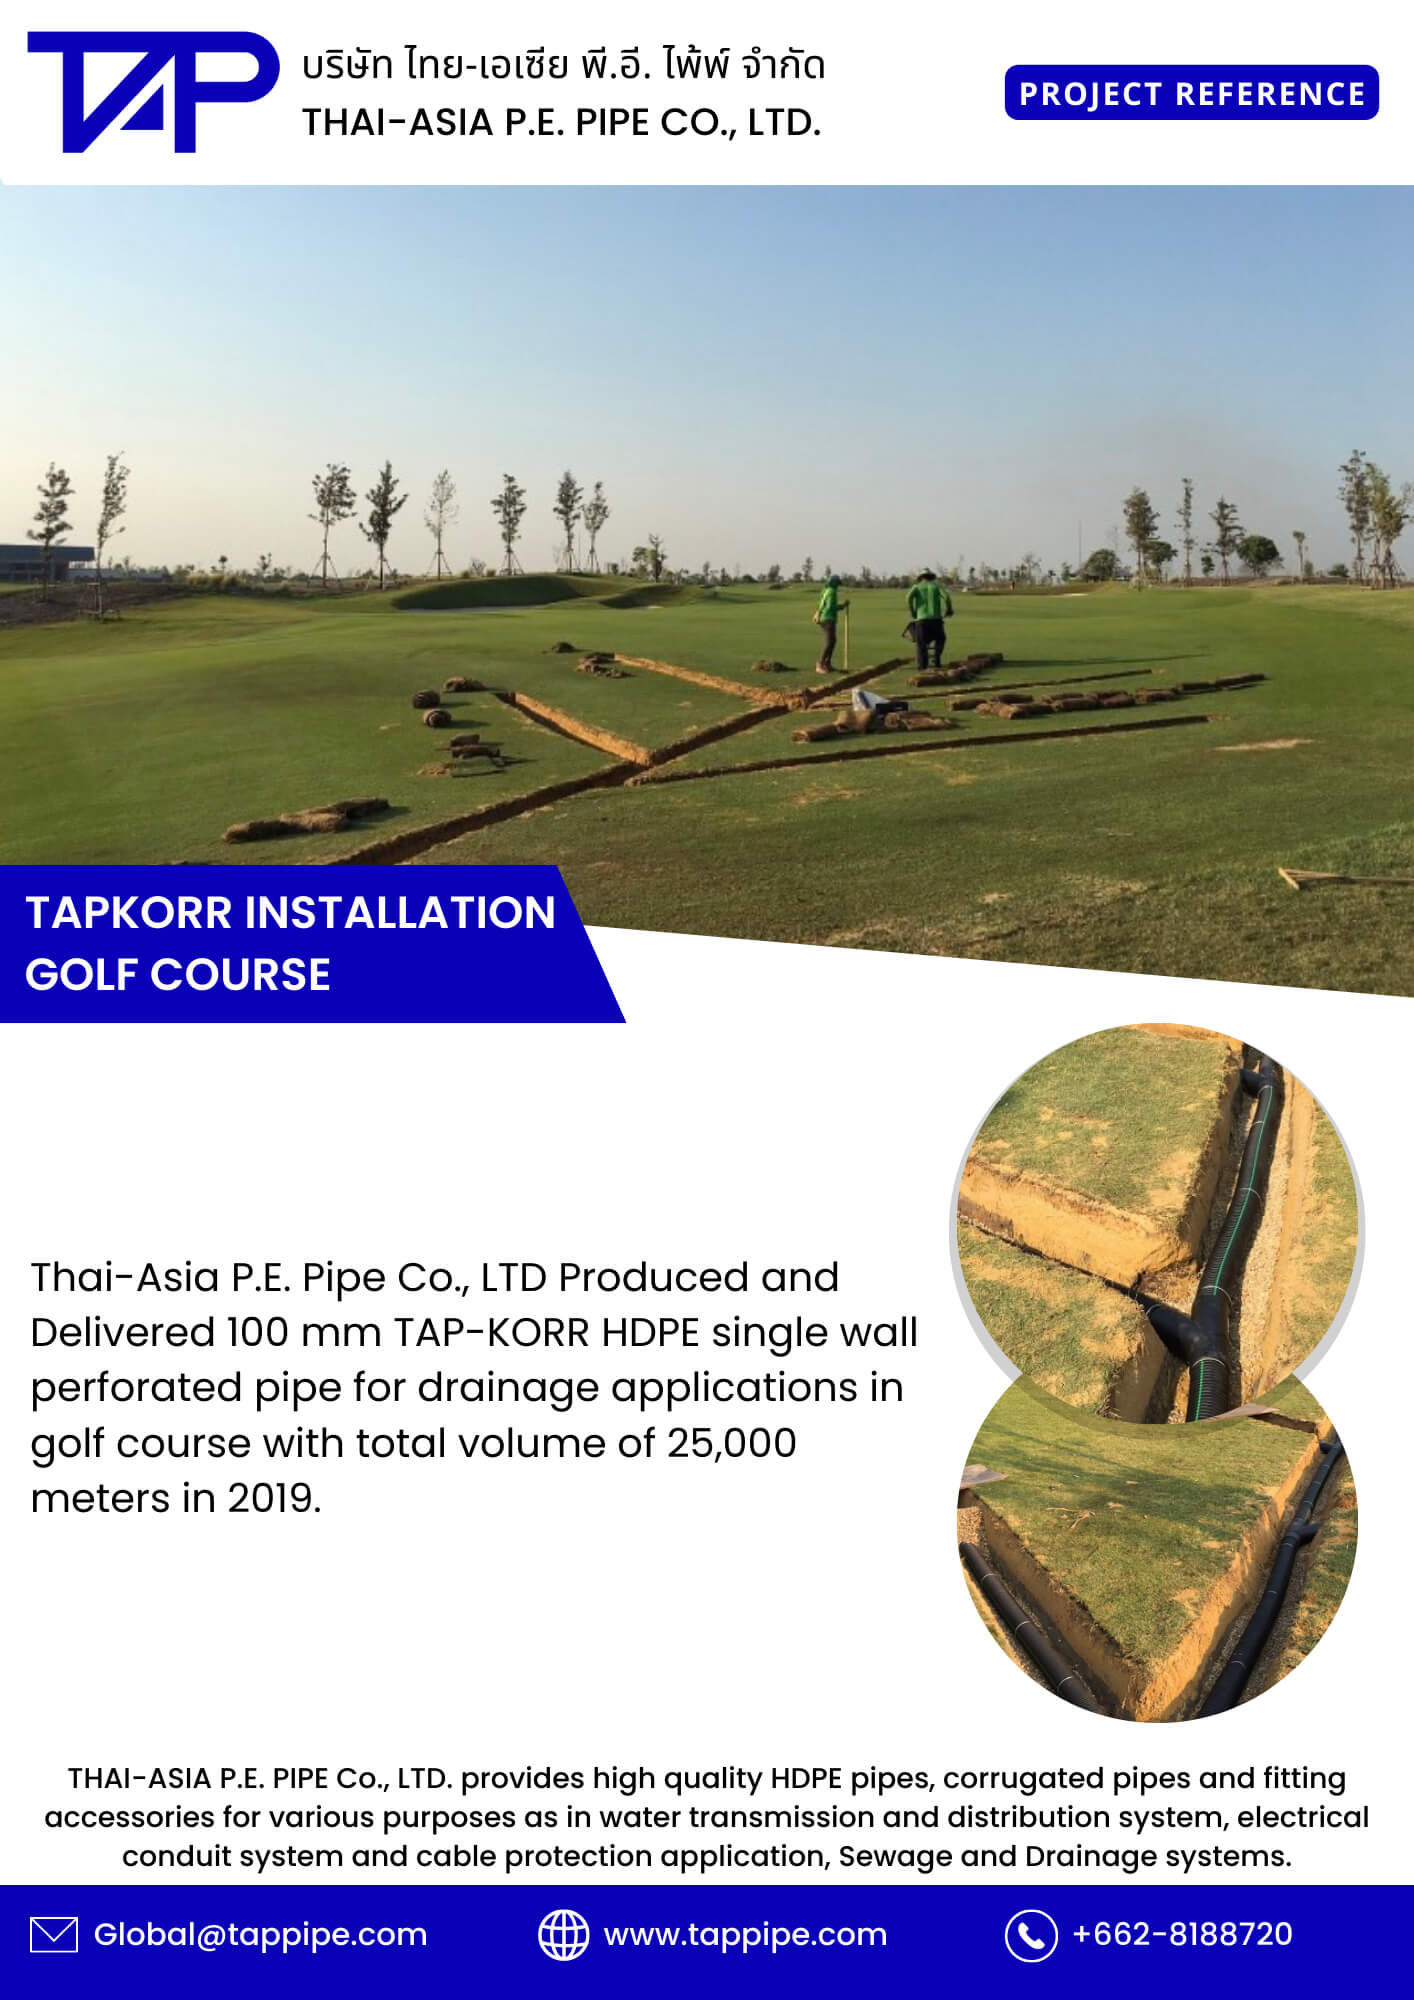 Infographic illustrating the installation process of corrugated pipes ( TAPKORR ) in a golf course